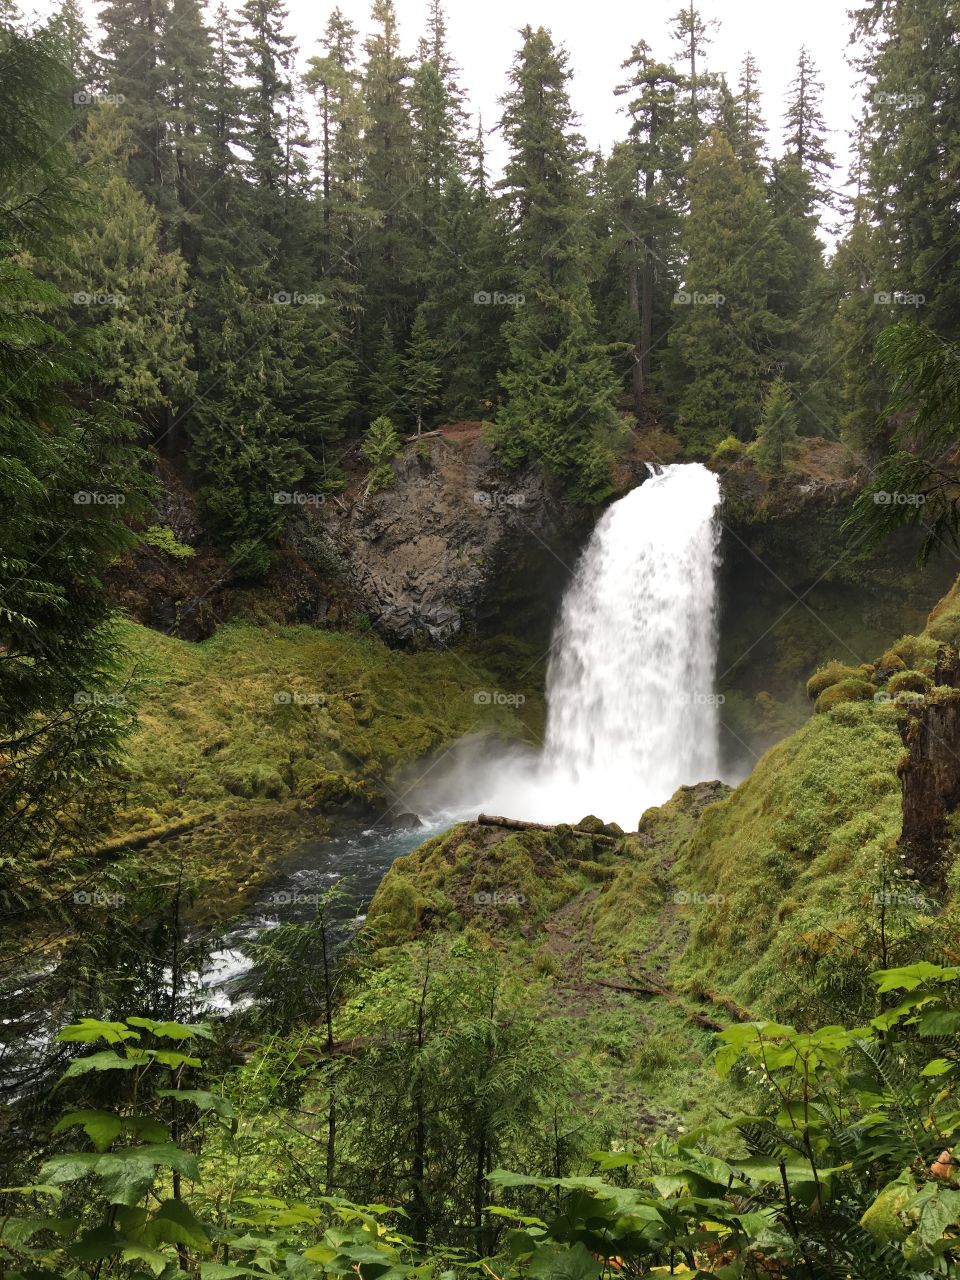 Straight on shot of a beautiful waterfall pushing tons of white water over allege plumbing to the stream below surrounded with beautiful mossy hillsides and evergreen trees with every accent of a forest. 